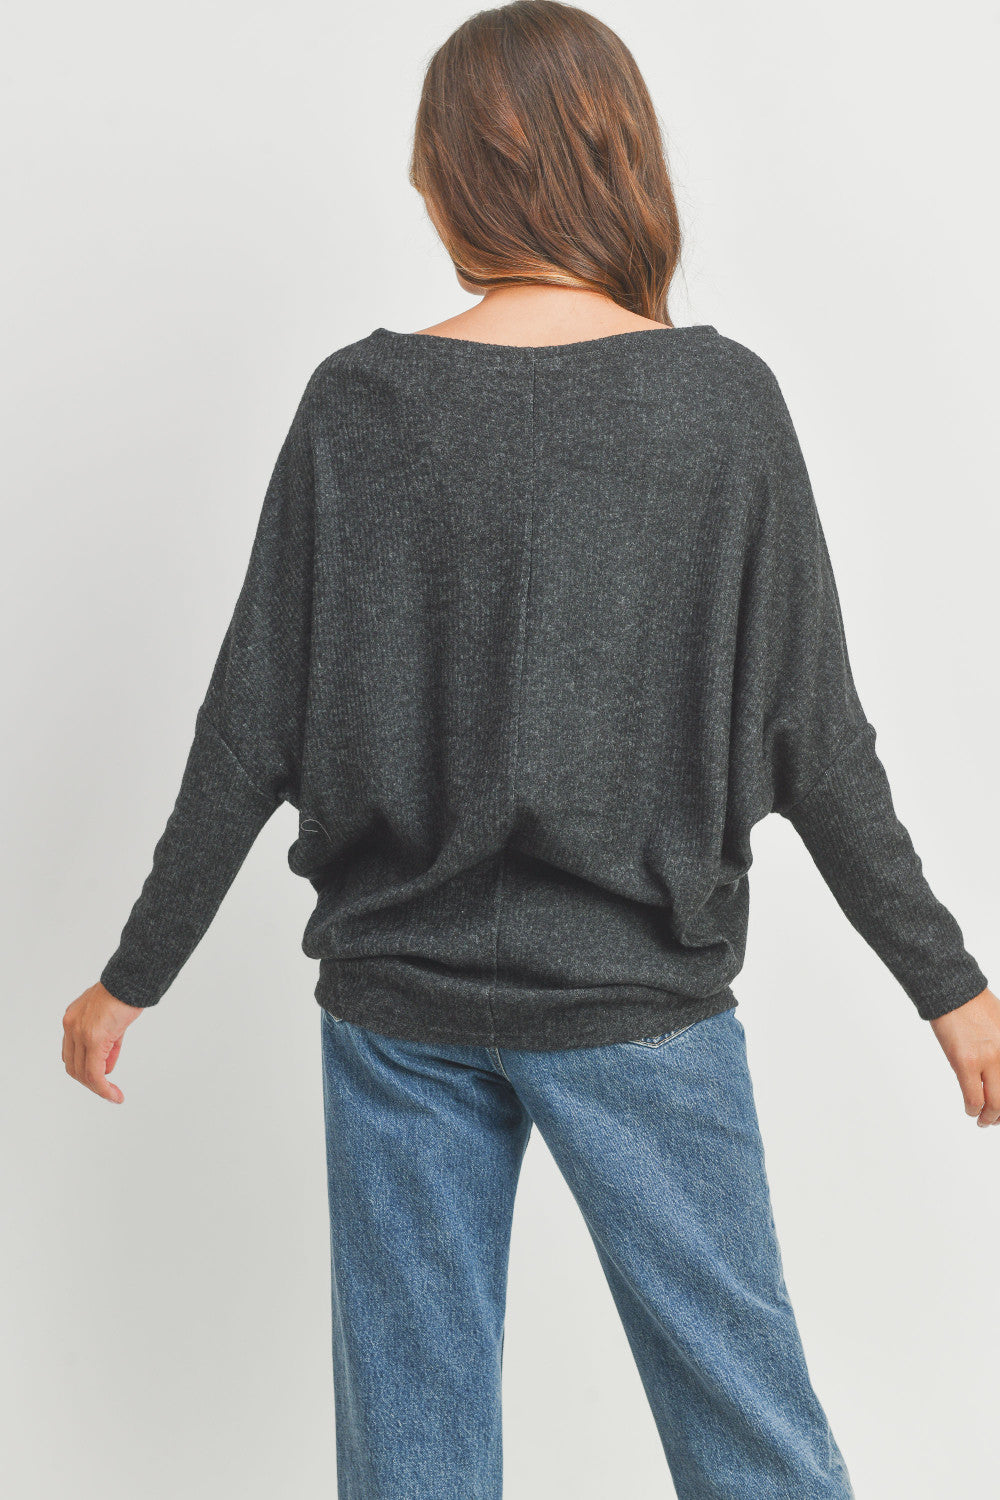 Delia Brushed Knit Top